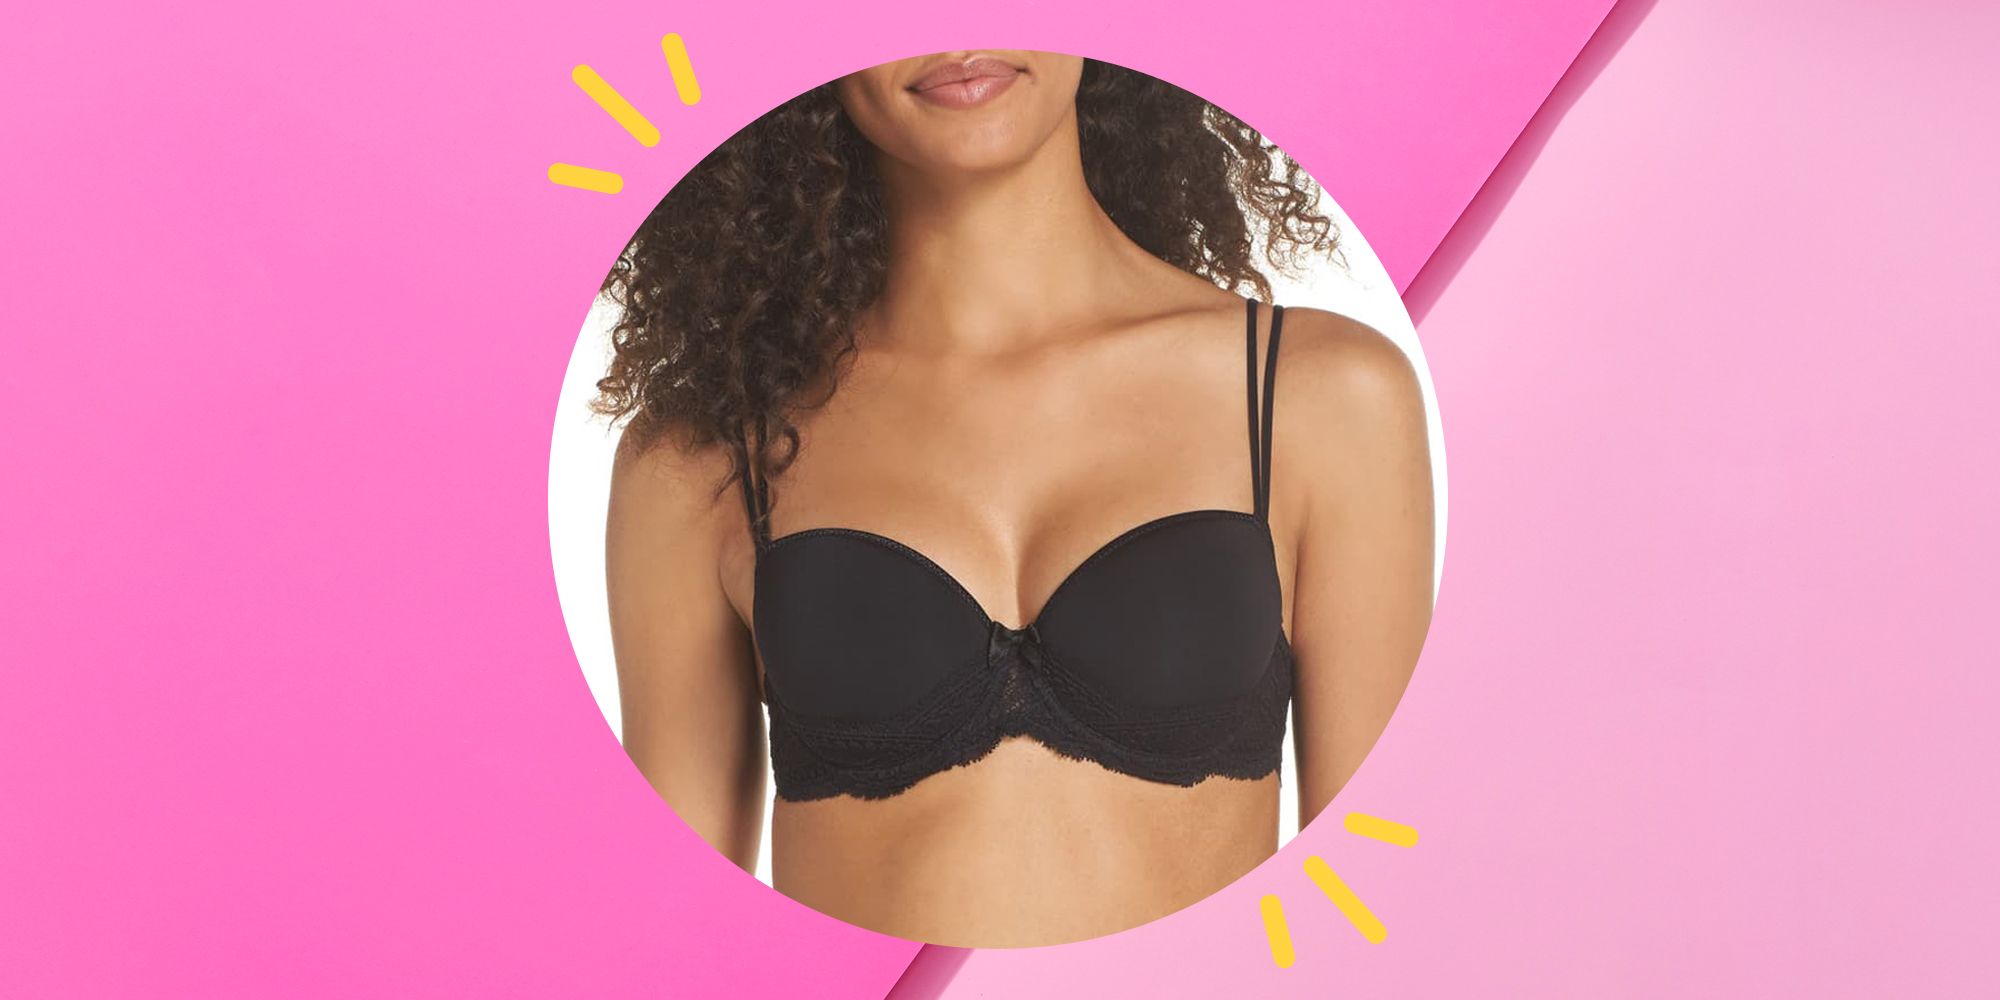 10 Best Half-Cup And Demi Bras Of 2022 To Lift And Shape Cleavage